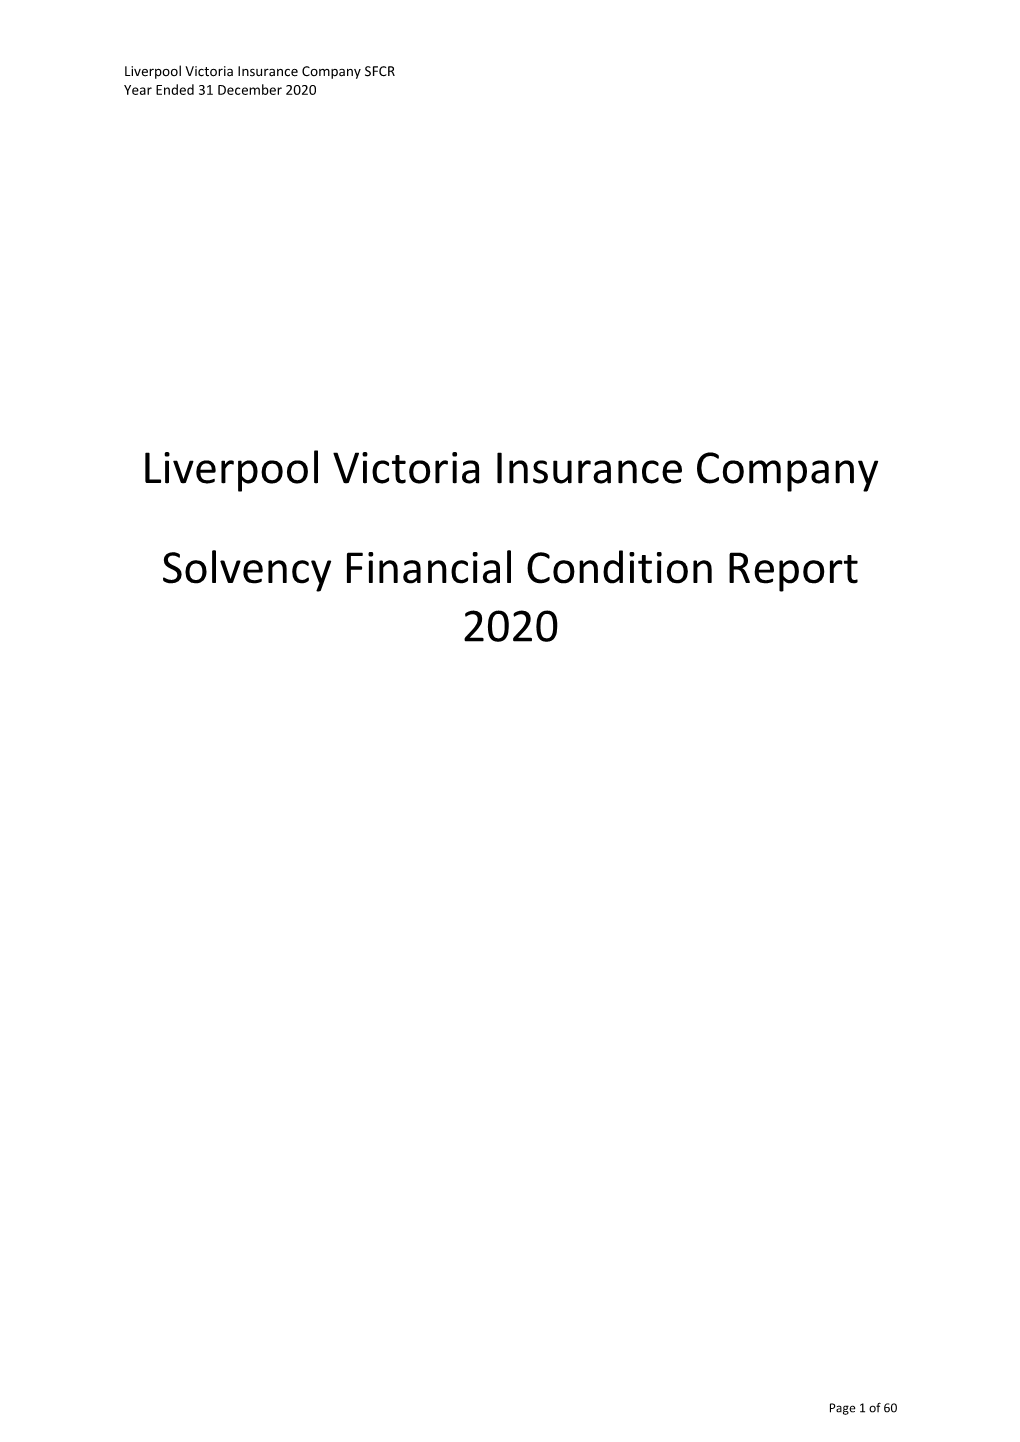 Liverpool Victoria Insurance Company SFCR Year Ended 31 December 2020